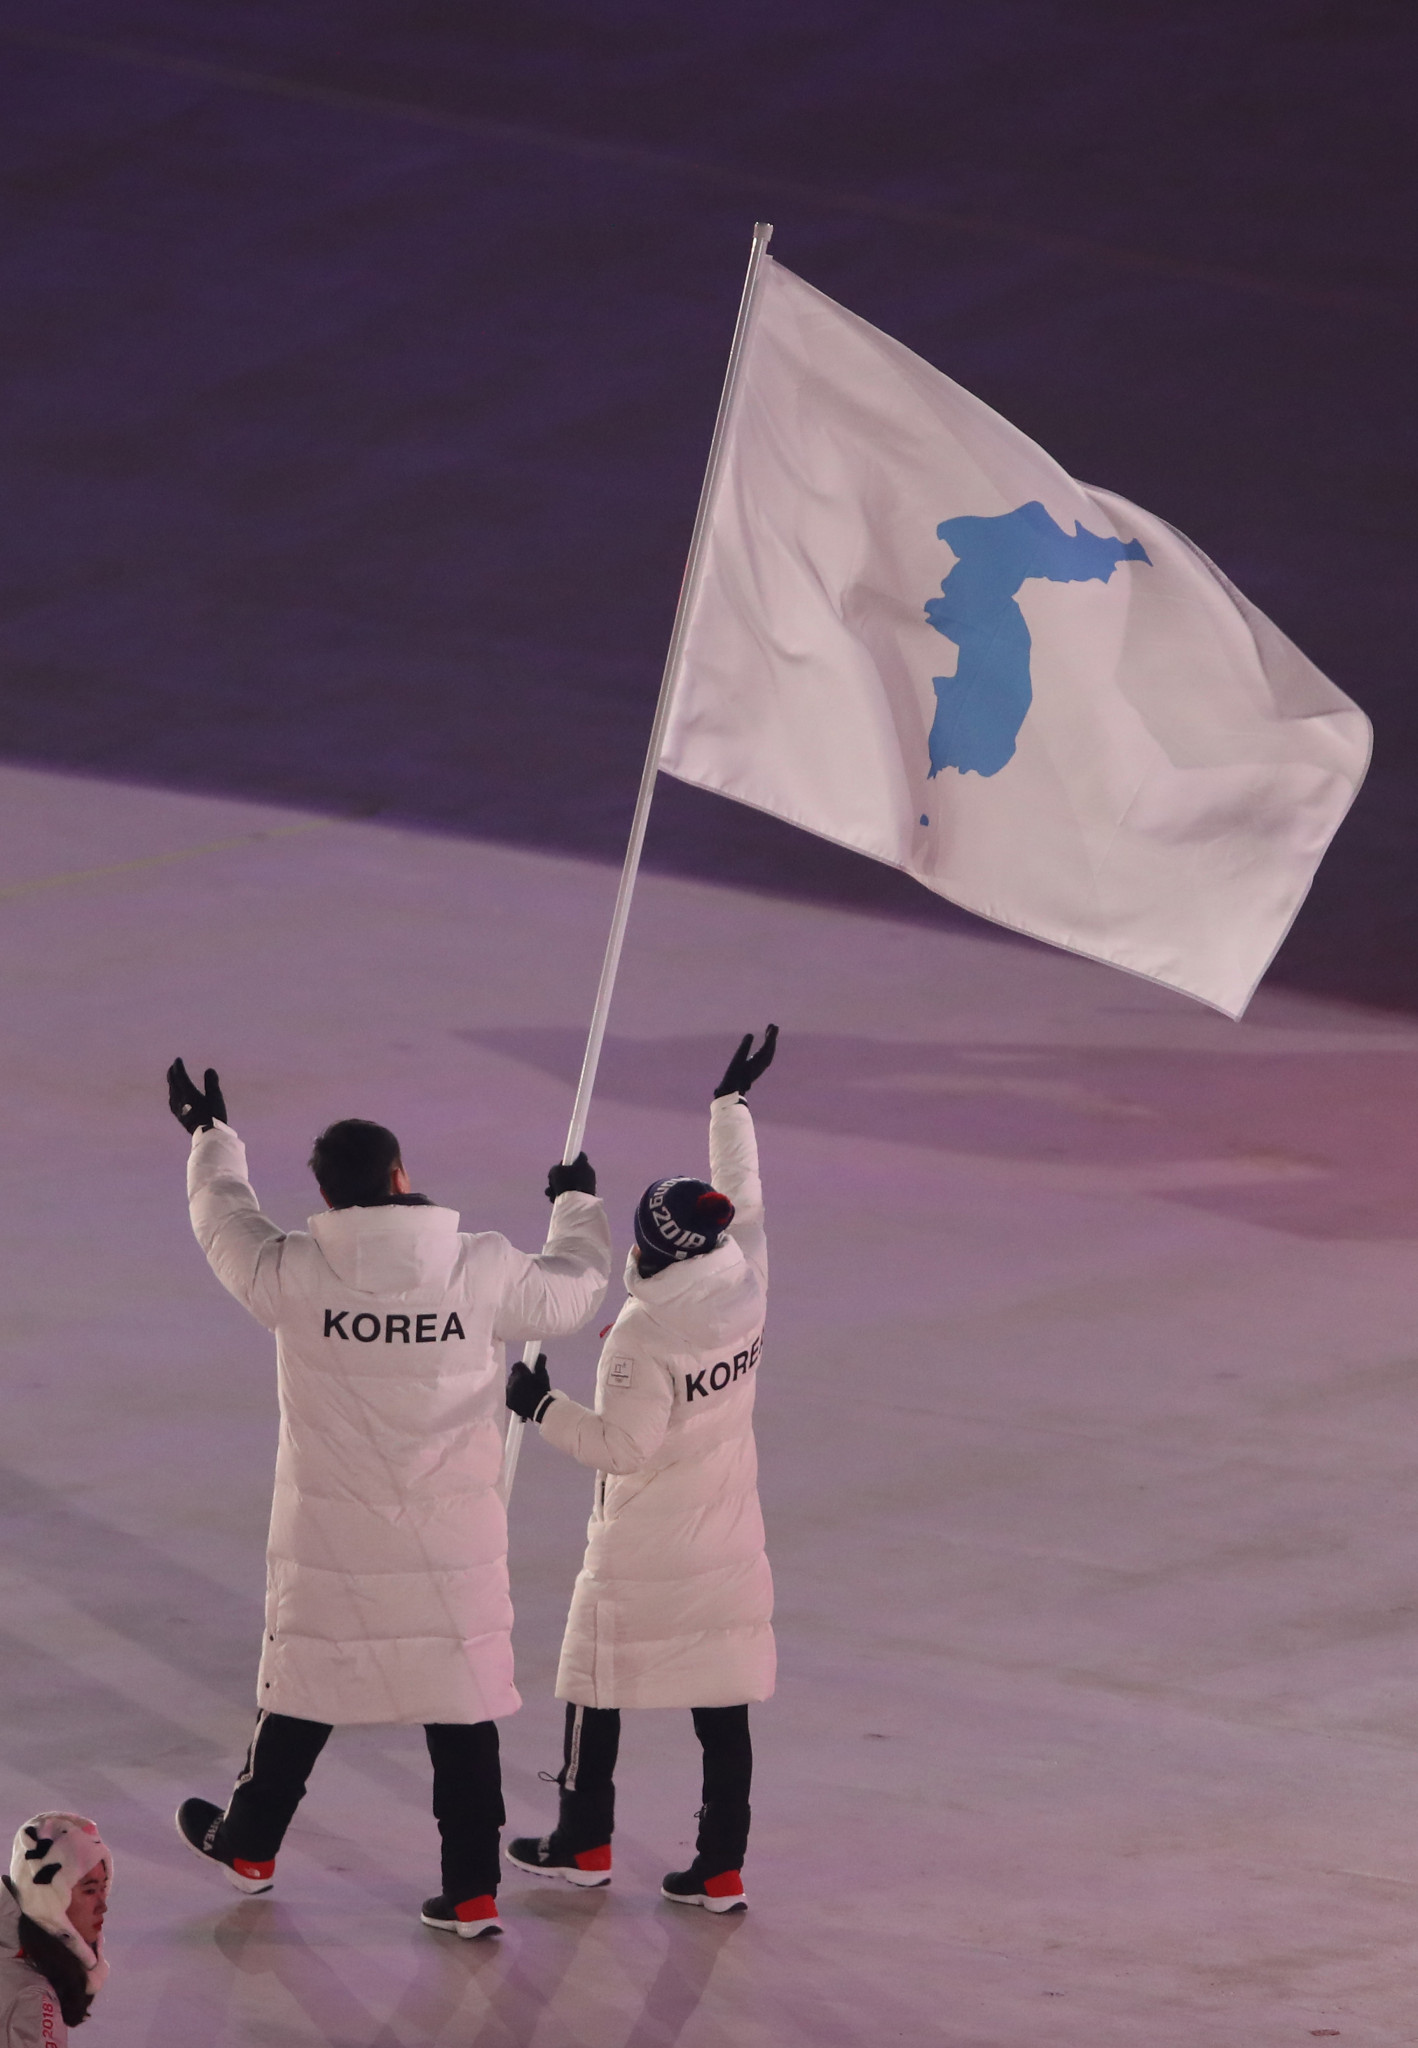 The unified Korea flag is flown at the Pyeongchang 2018 Winter Olympics in the South in February ©Getty Images